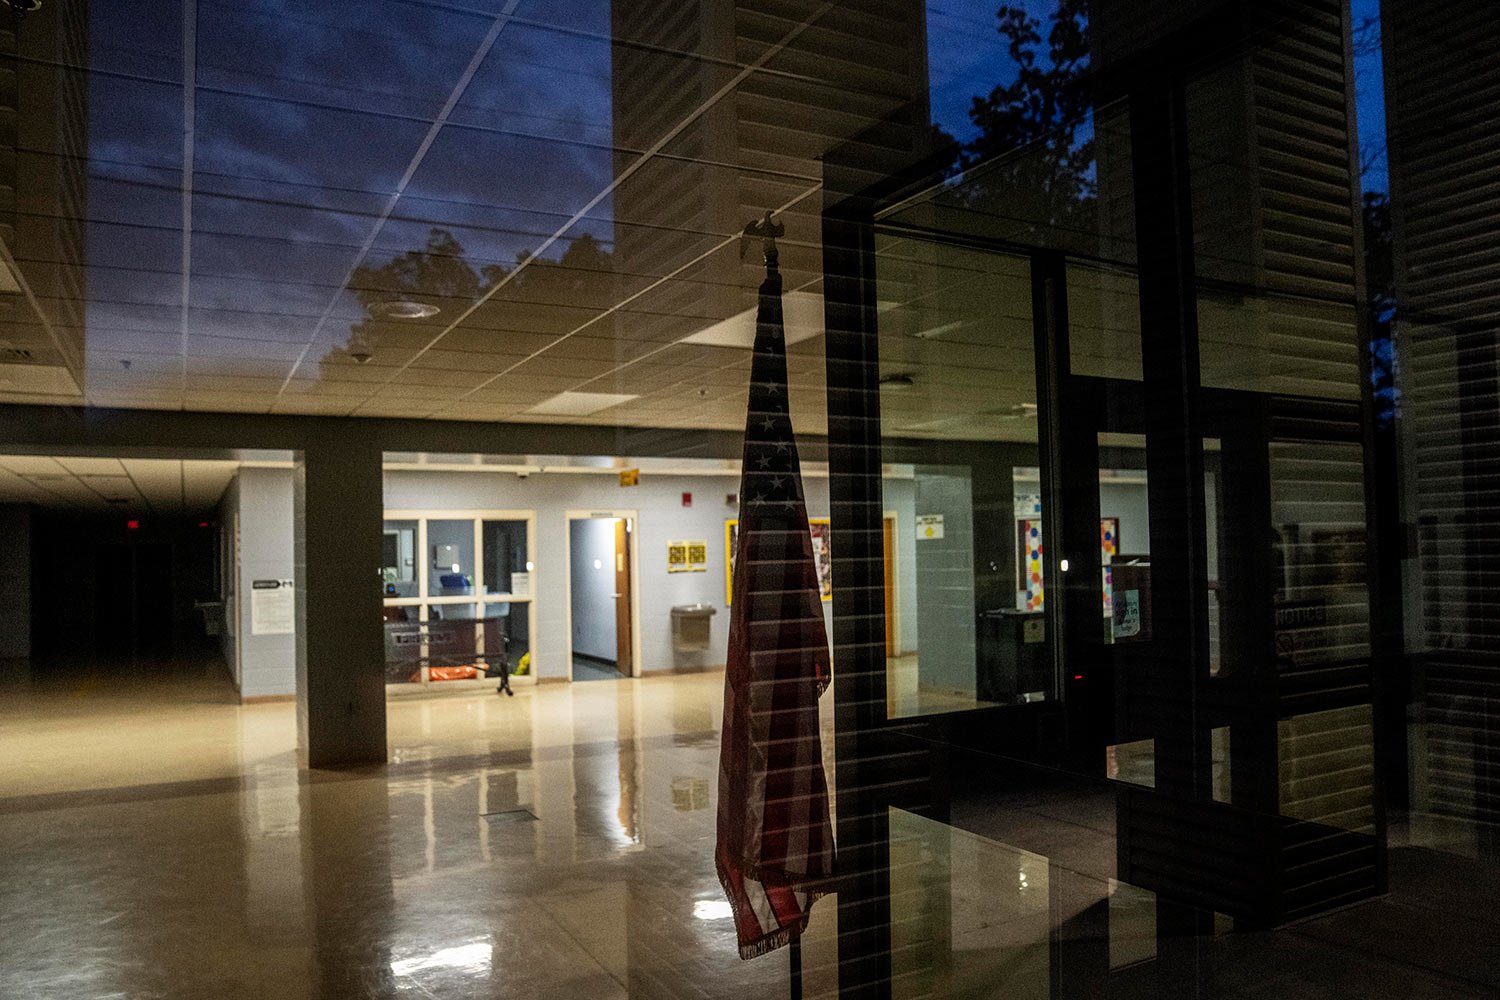  An American flag stands in the lobby of Heath High School in West Paducah, Ky., Sunday, June 4, 2023. (AP Photo/David Goldman)  